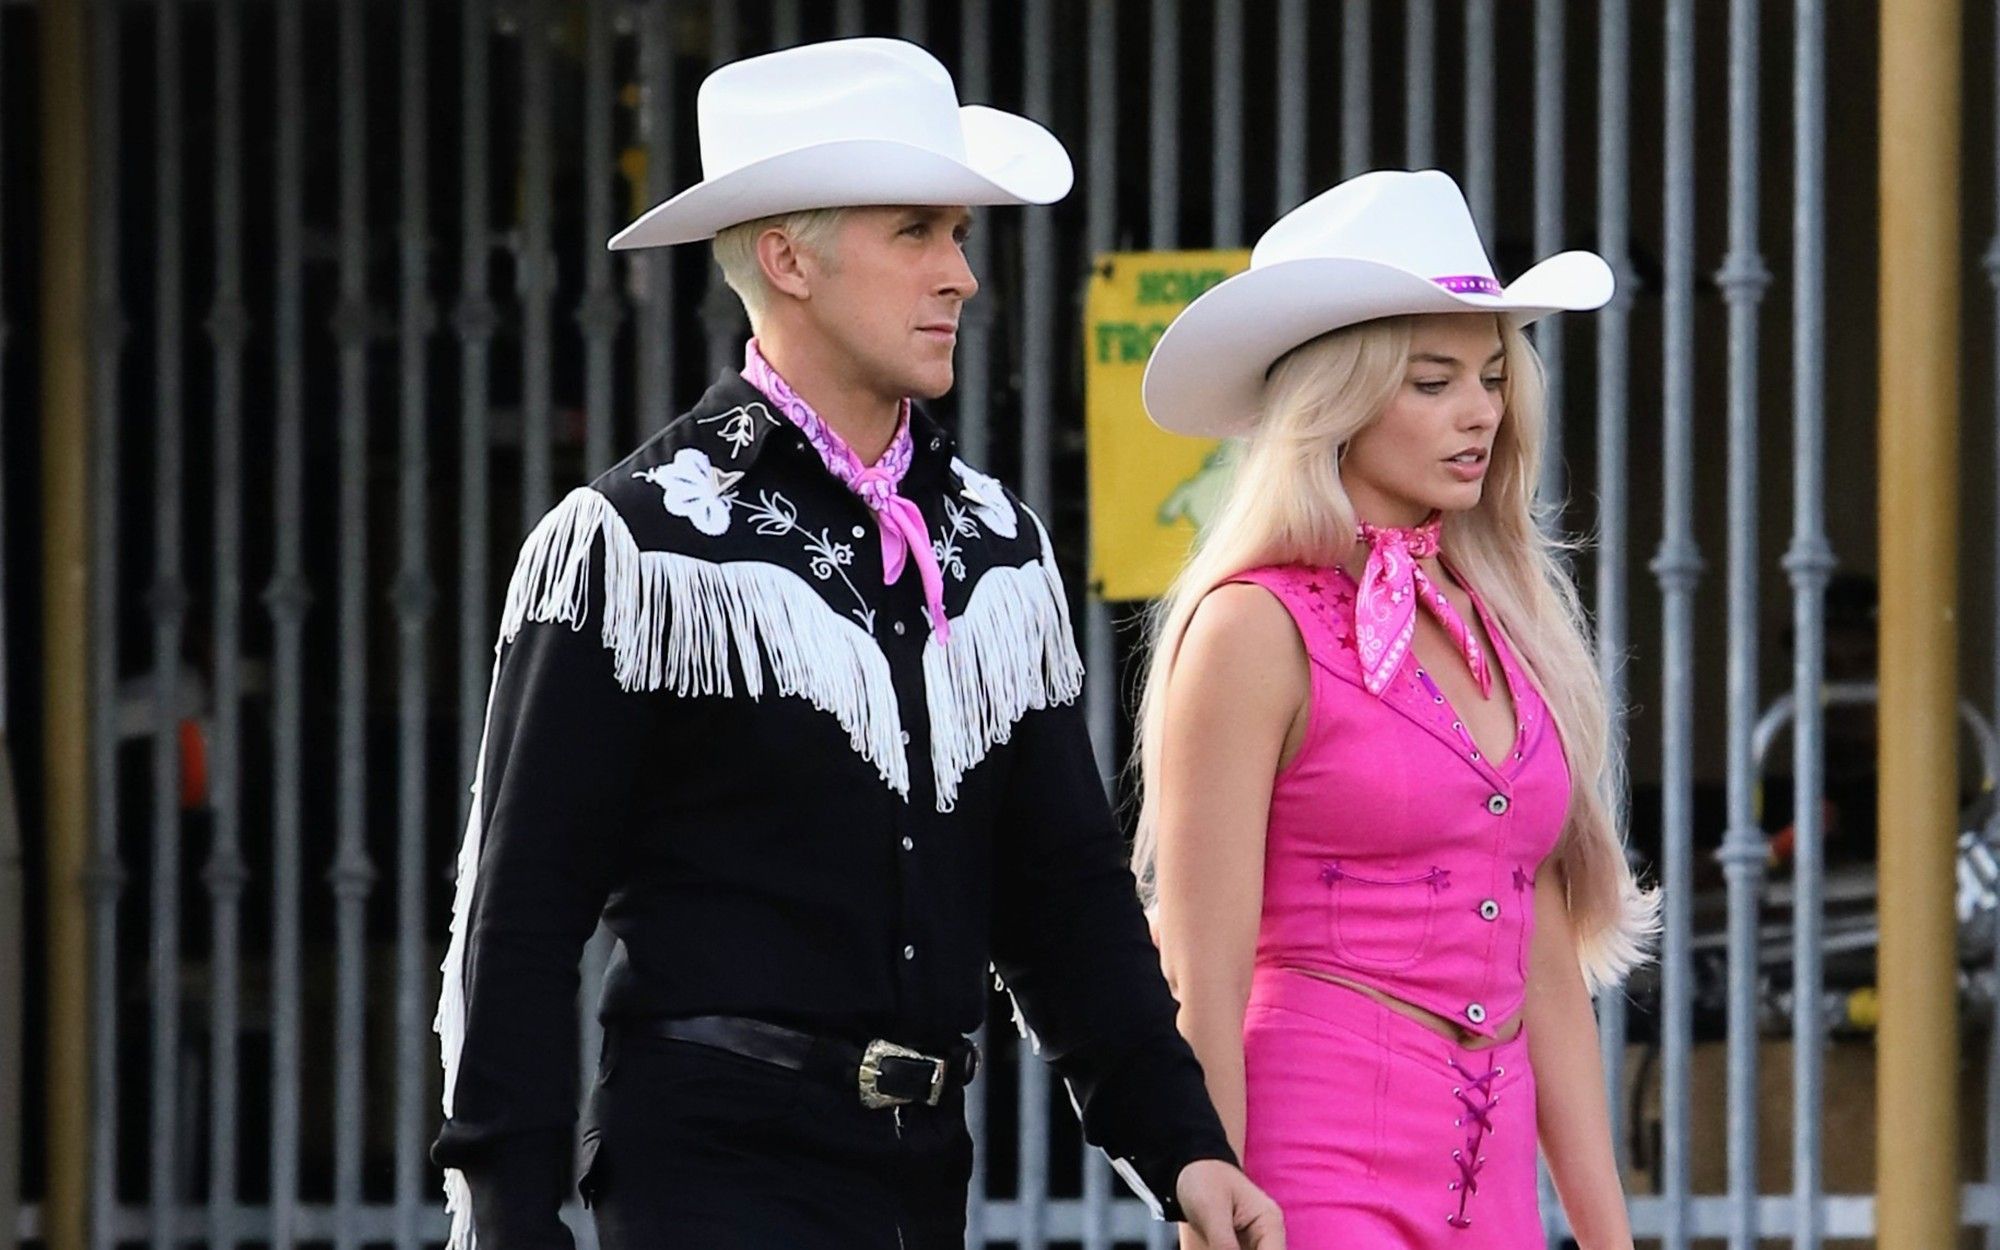 Will the new Barbie movie revive the western aesthetic?